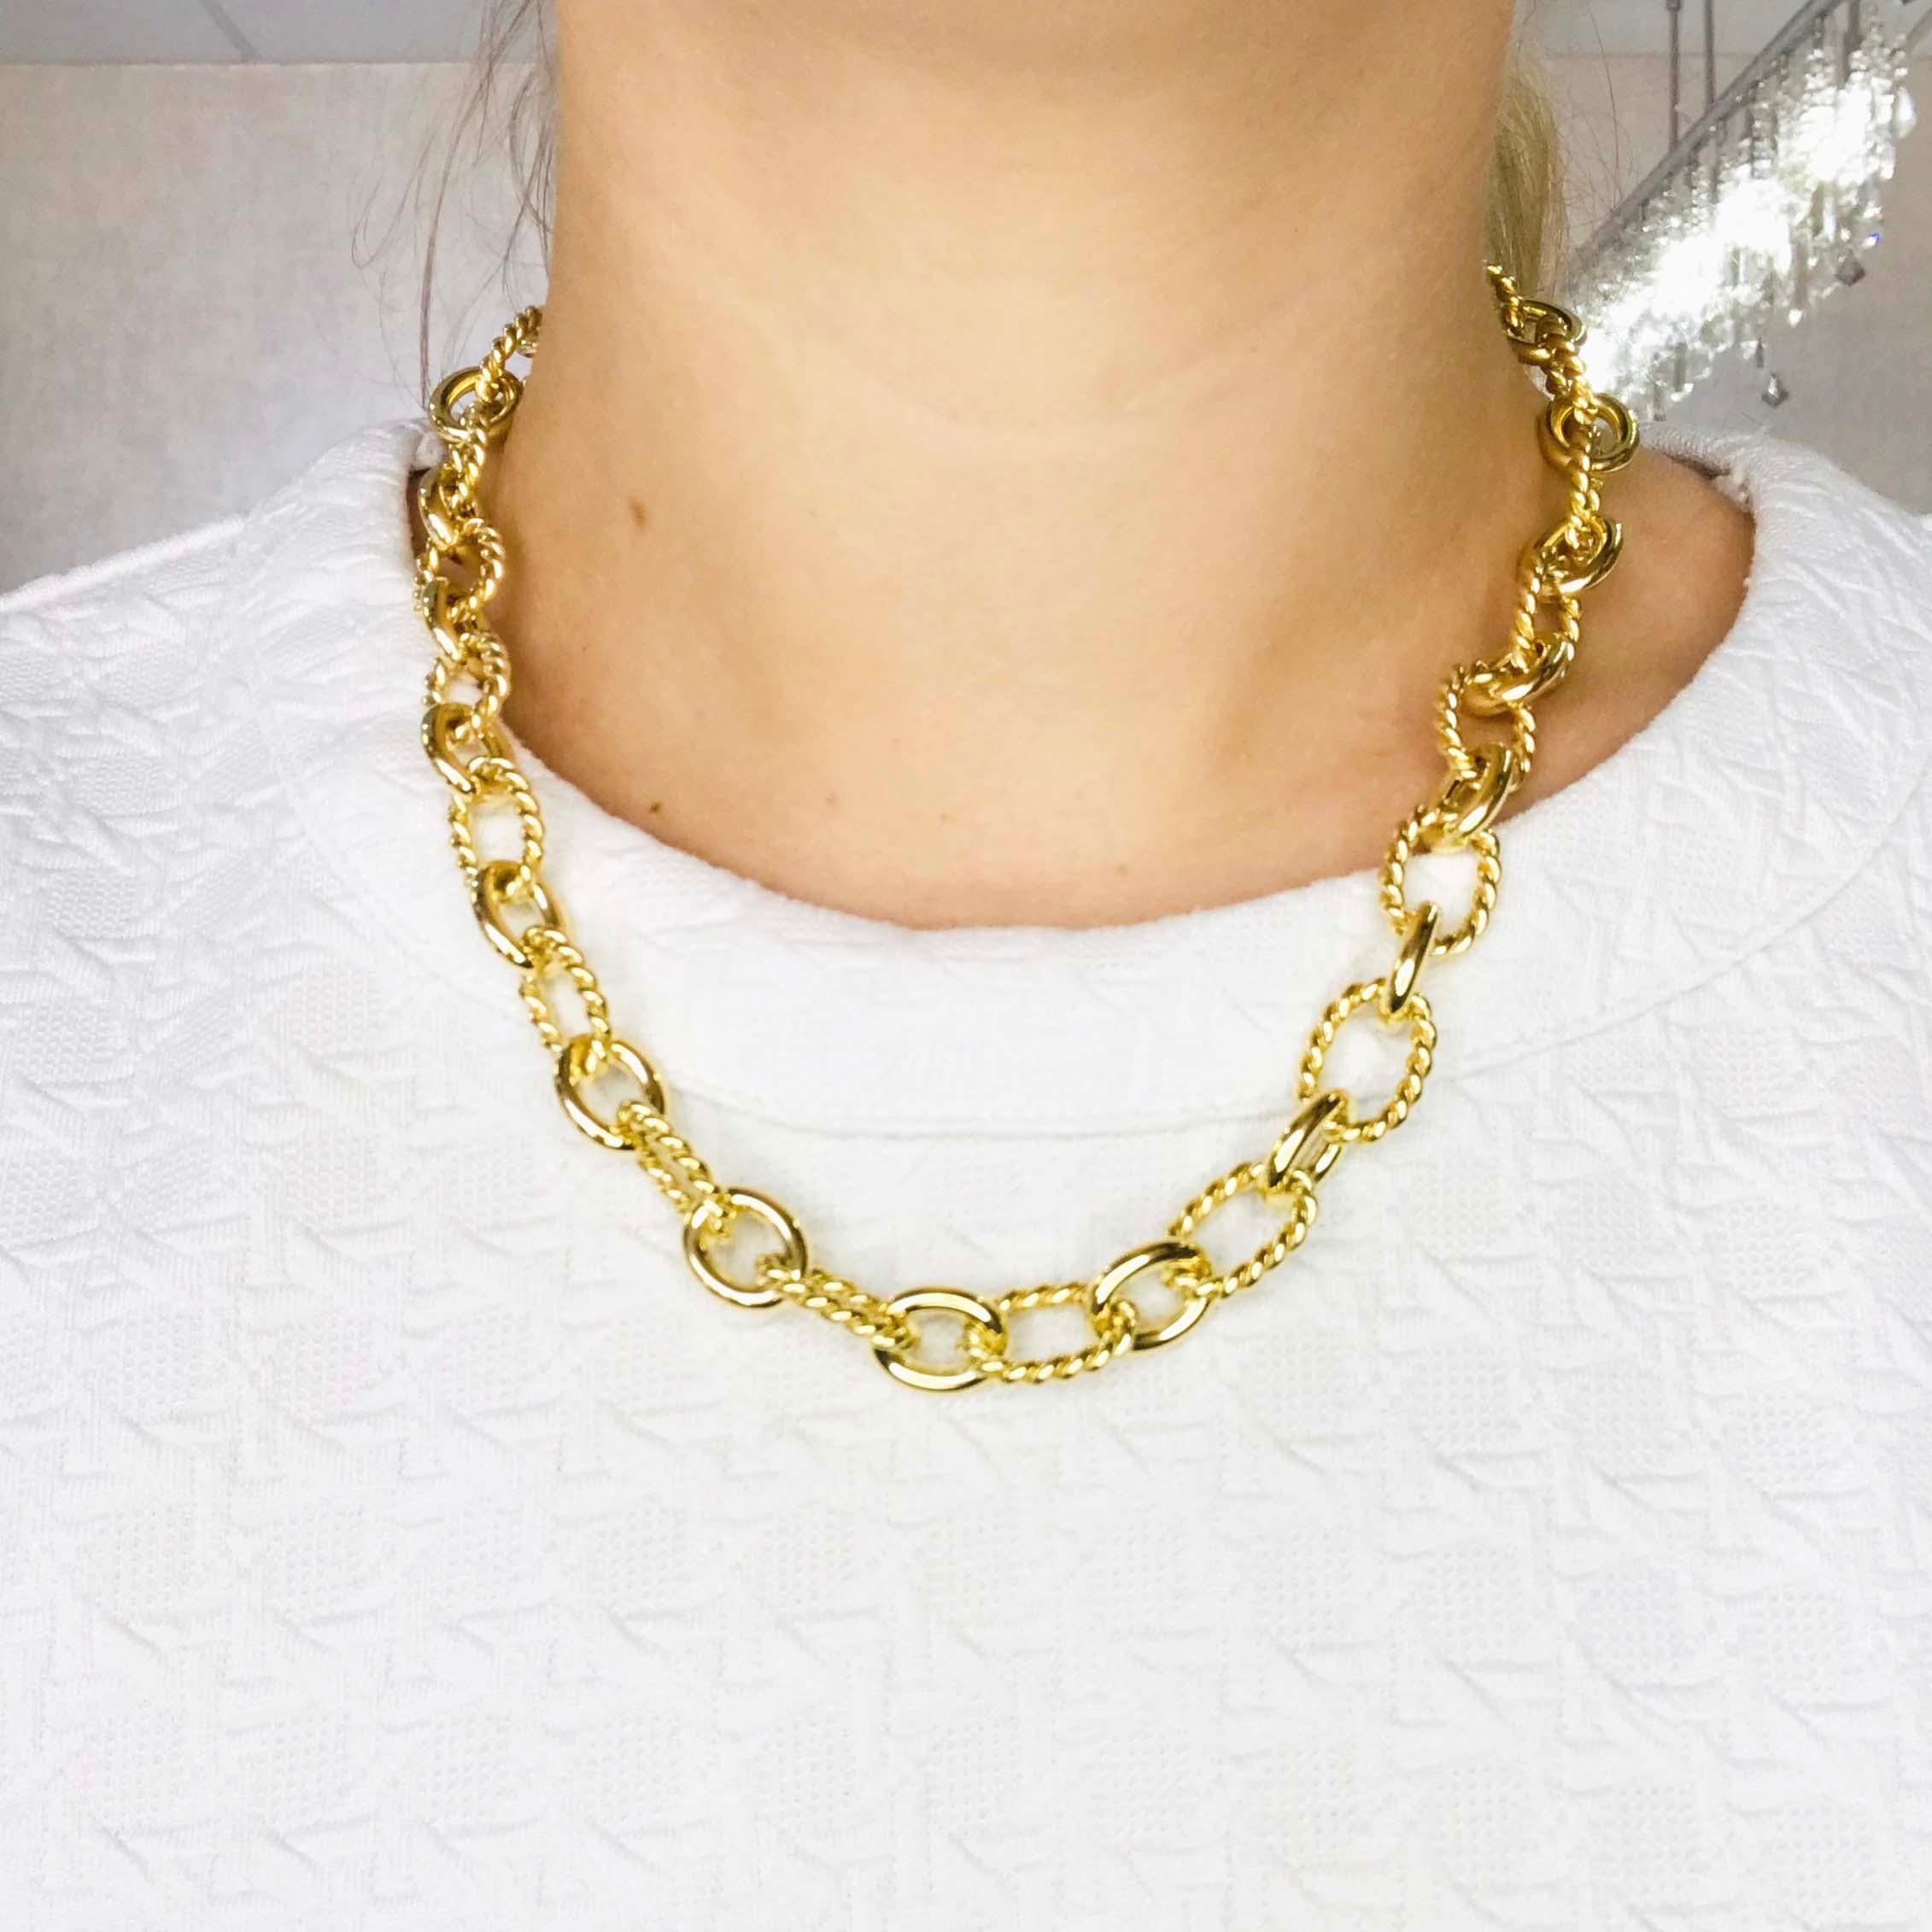 Chain necklaces have made a huge come back in fashion jewelry! Larger the better and the heavier the gold the better! Large link chain necklaces have been around for a long time and they are back and better than ever. With new innovative designs